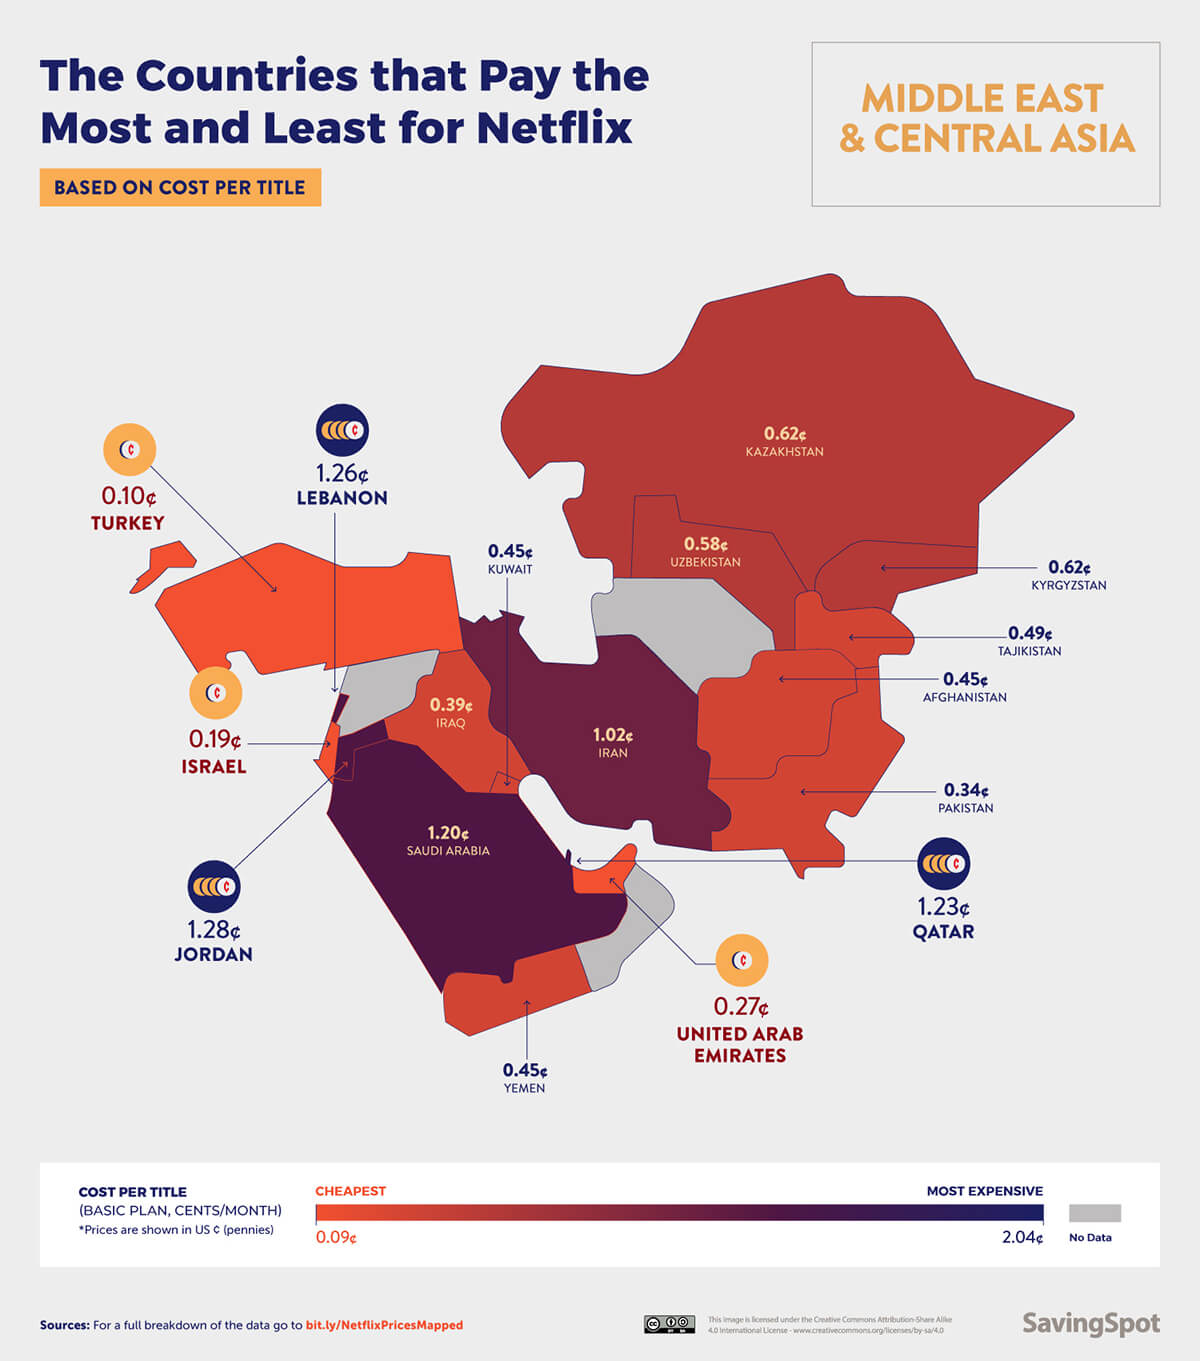 The Cost-per-title of Netflix in Middle East & Central Asia